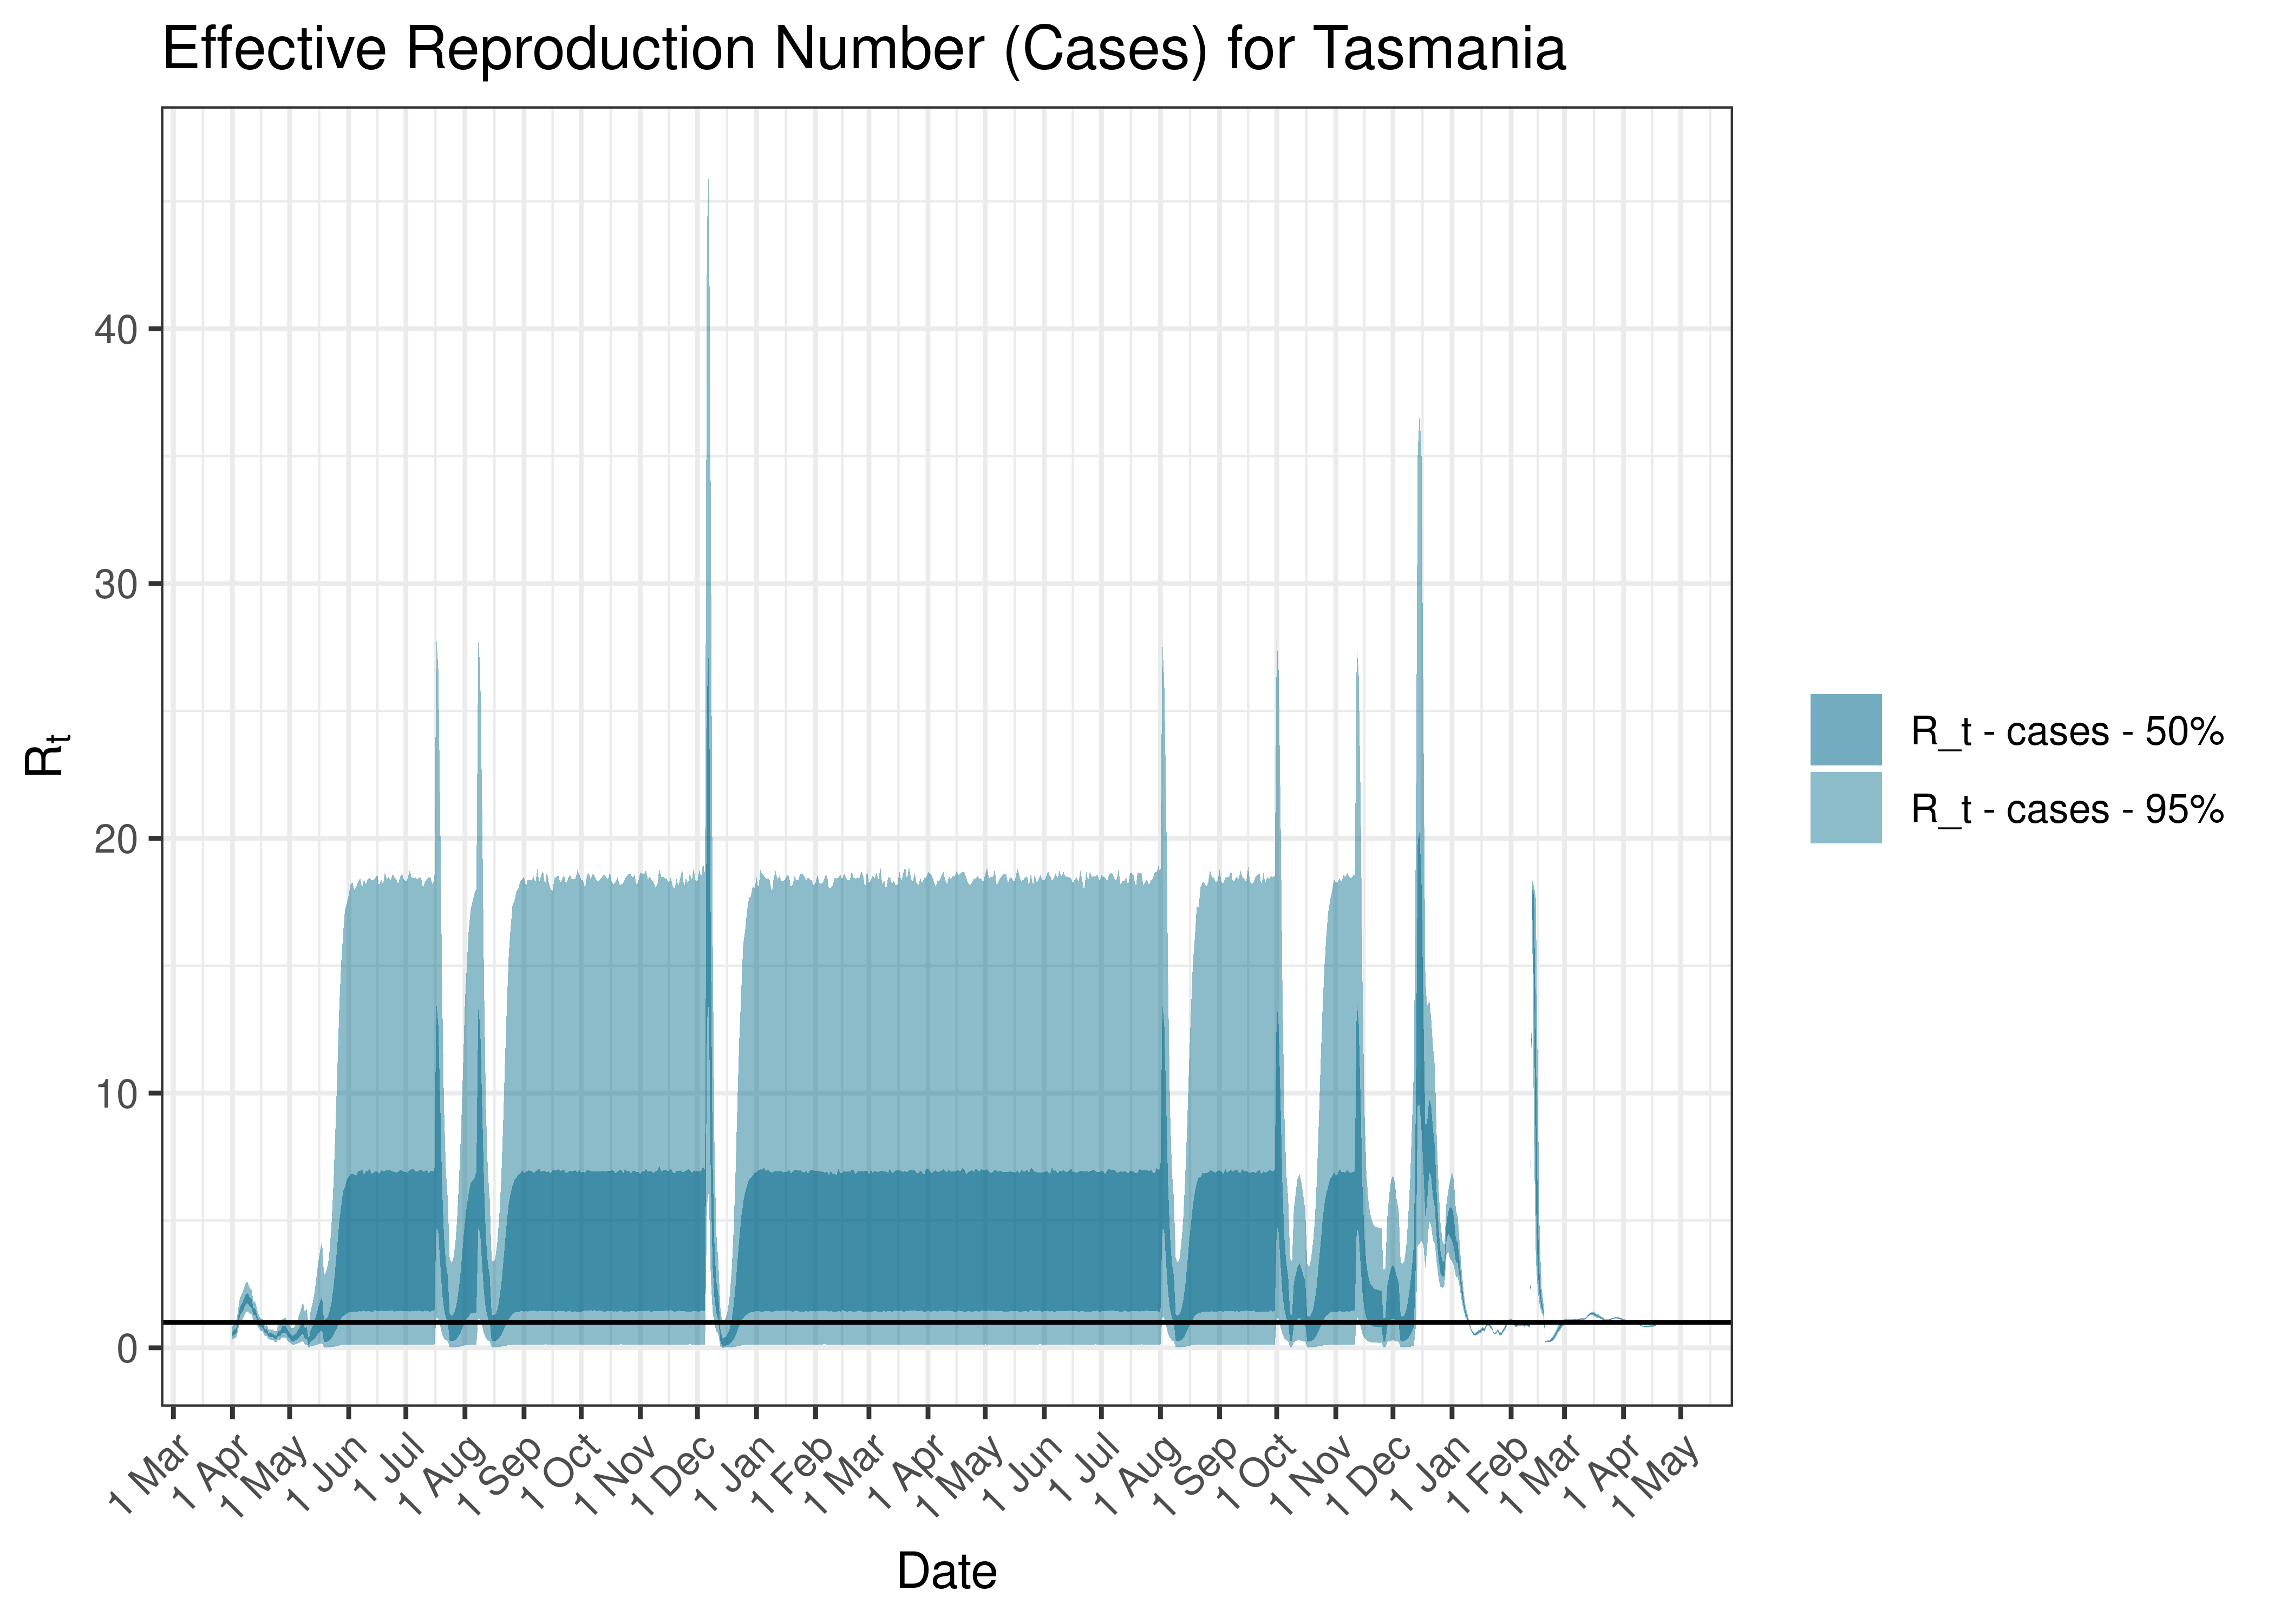 Estimated Effective Reproduction Number Based on Cases for Tasmania since 1 April 2020